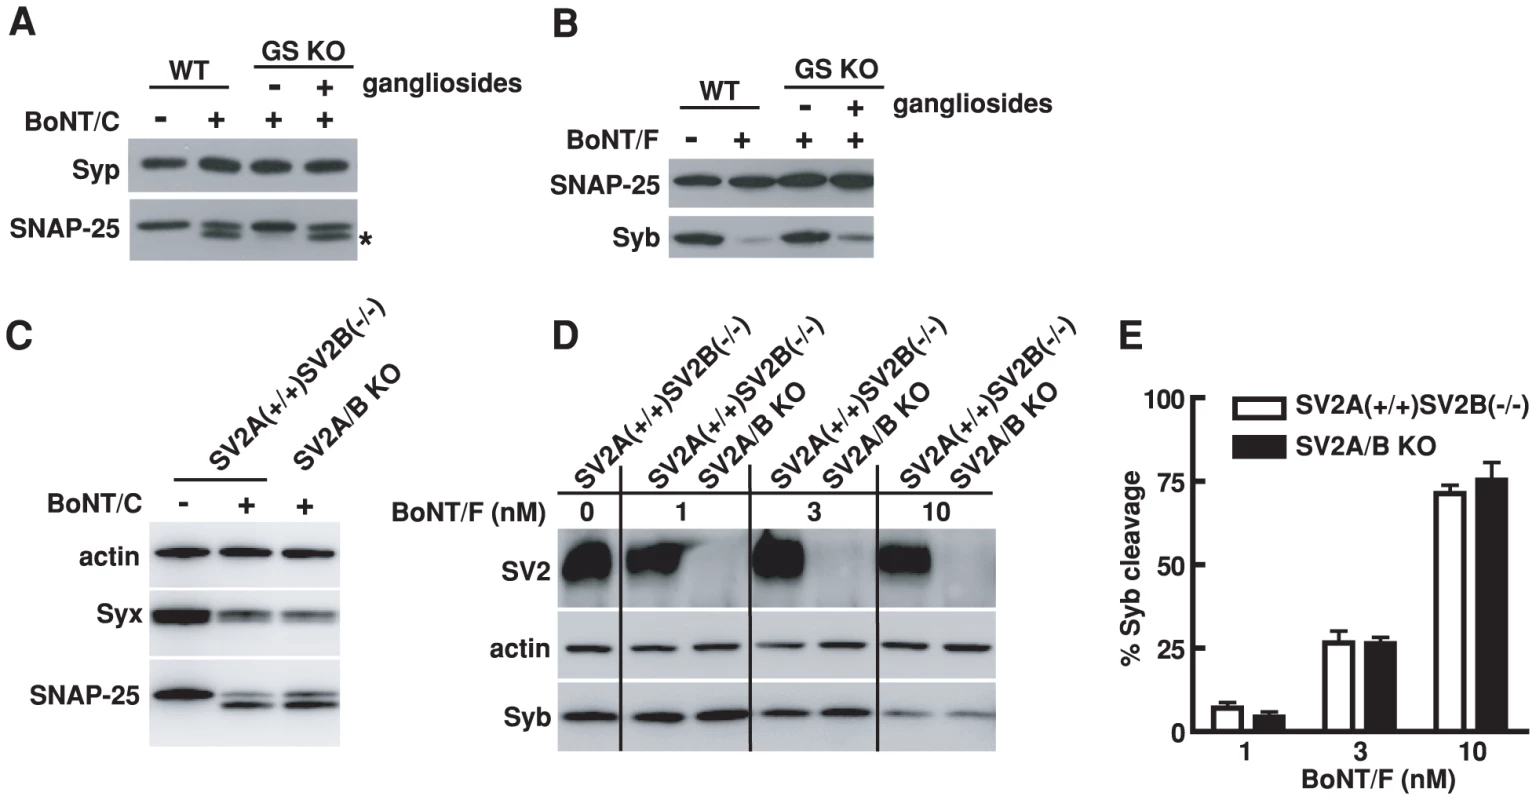 Entry of BoNT/C and BoNT/F into hippocampal neurons requires PSG but not SV2.